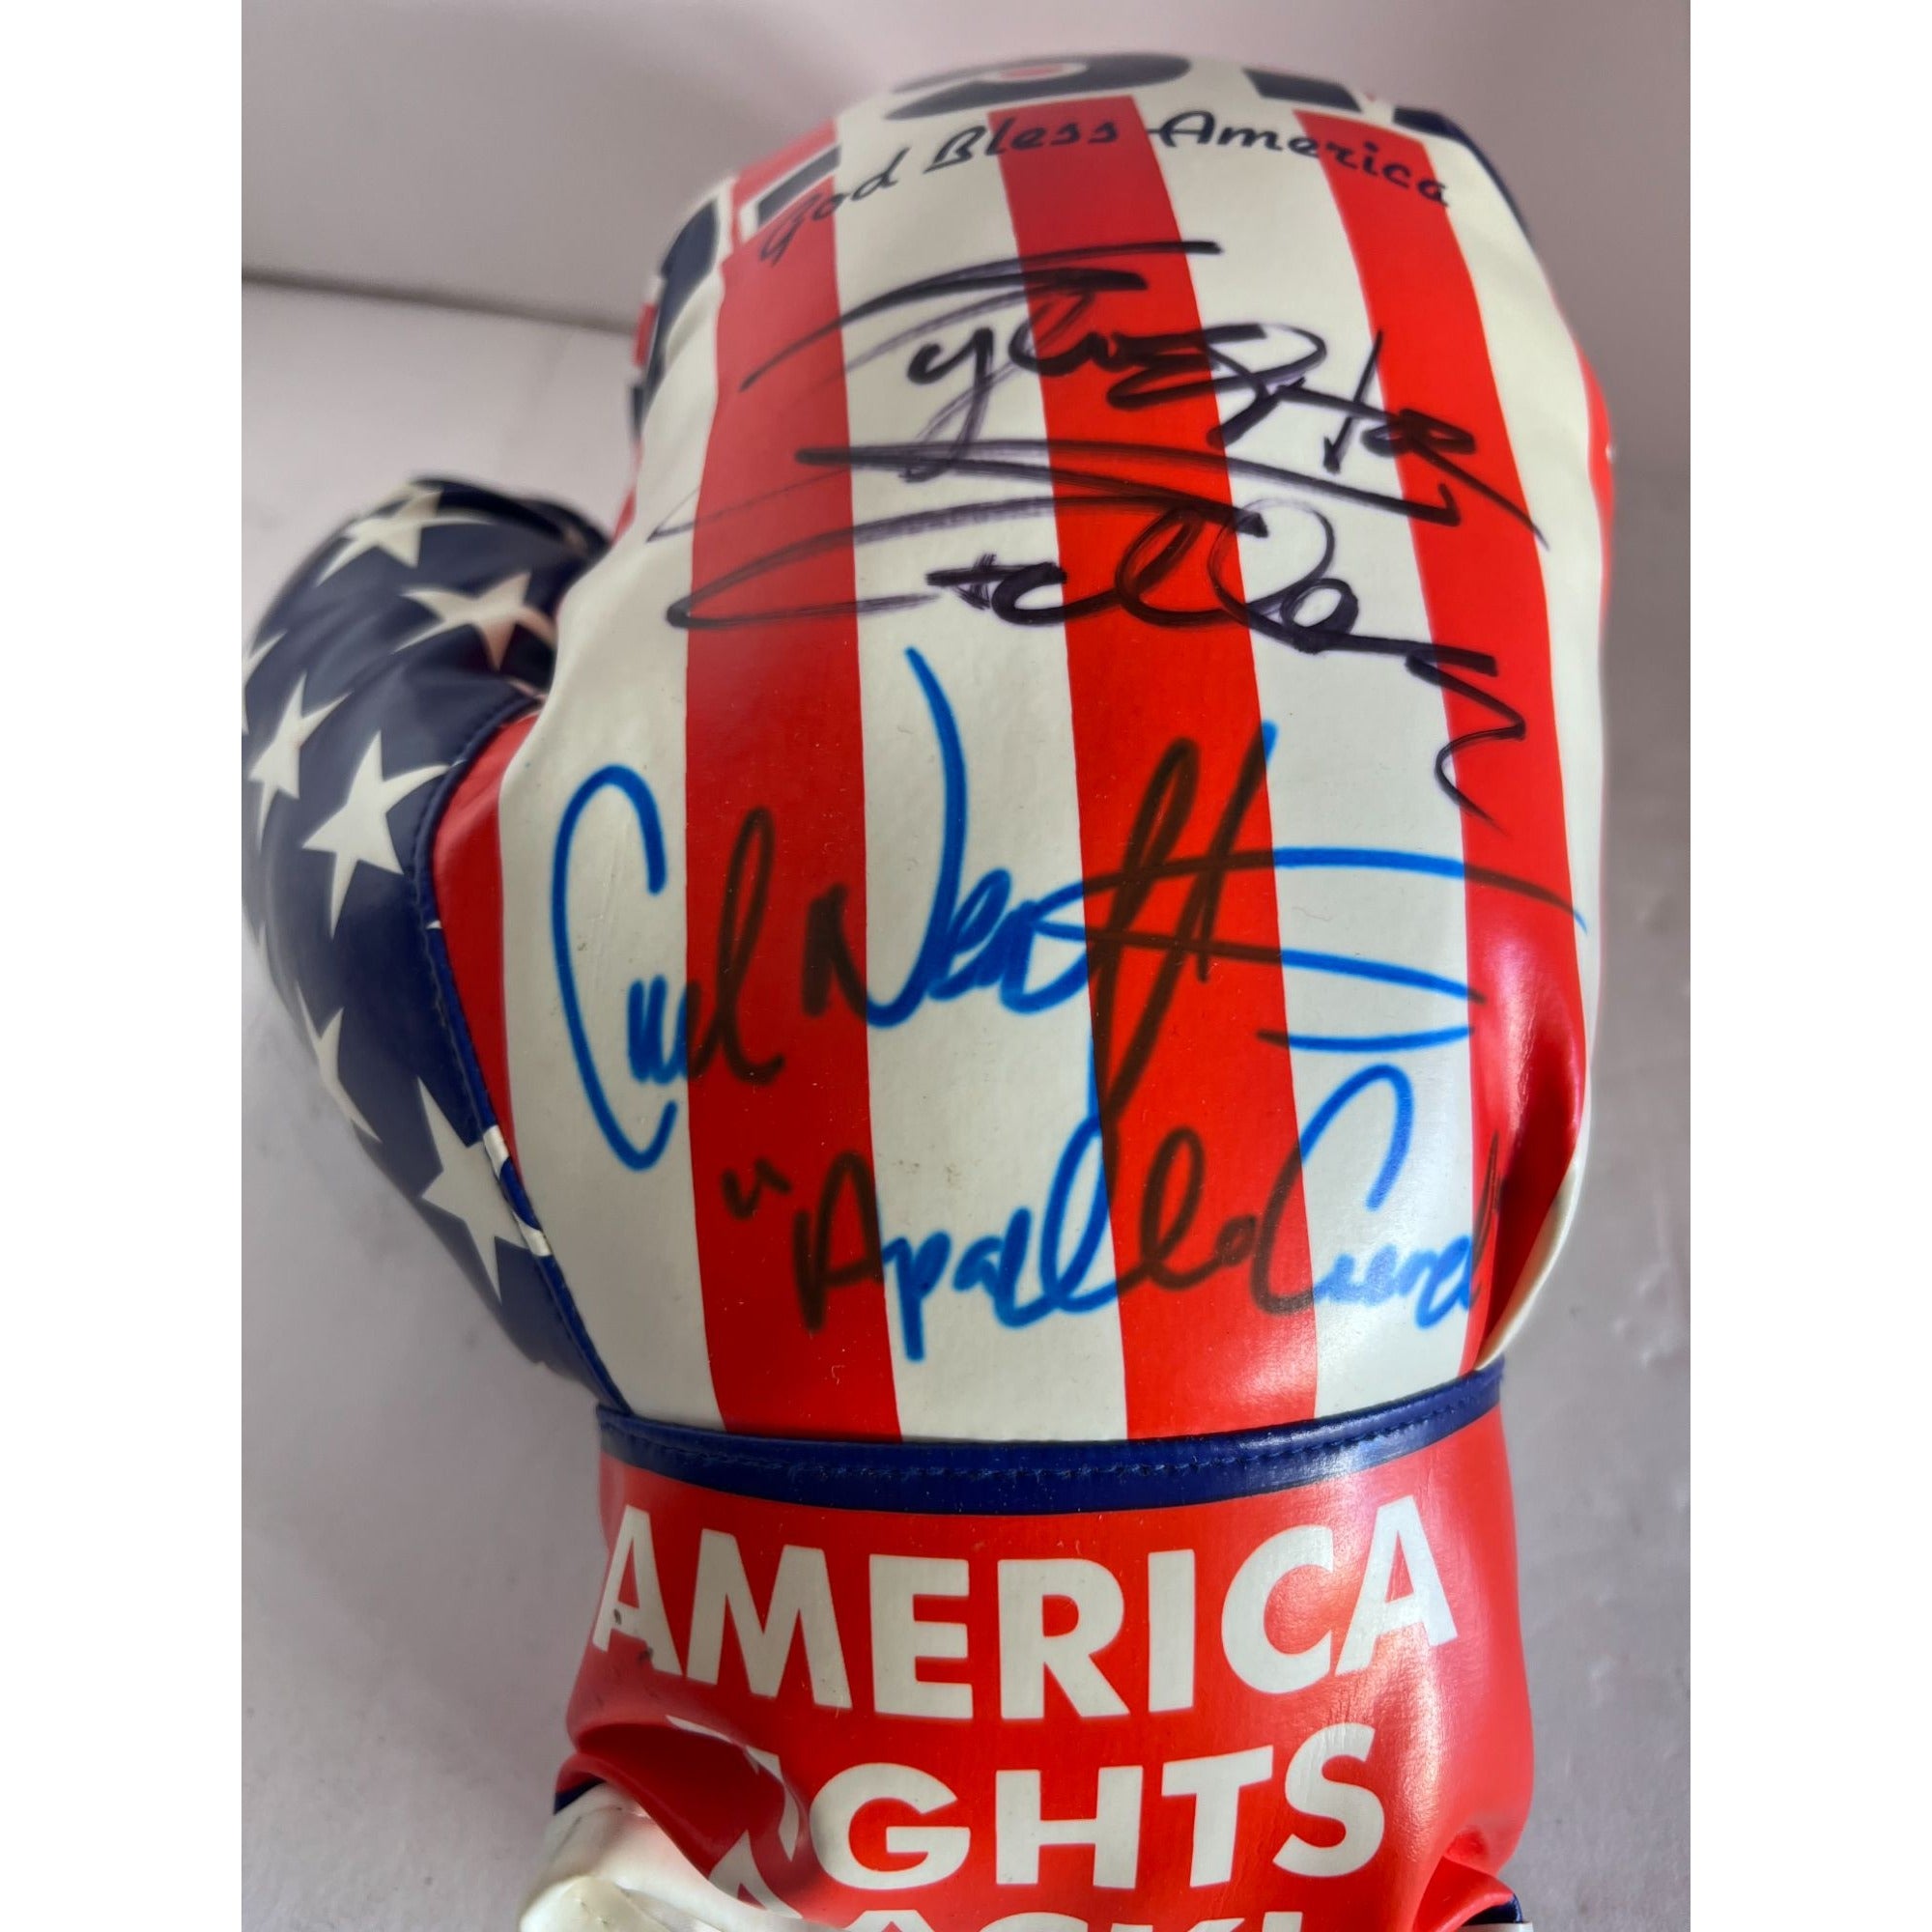 Sylvester Stallone Rocky Balboa and Carl Weathers Apollo Creed USA boxing glove signed with proof